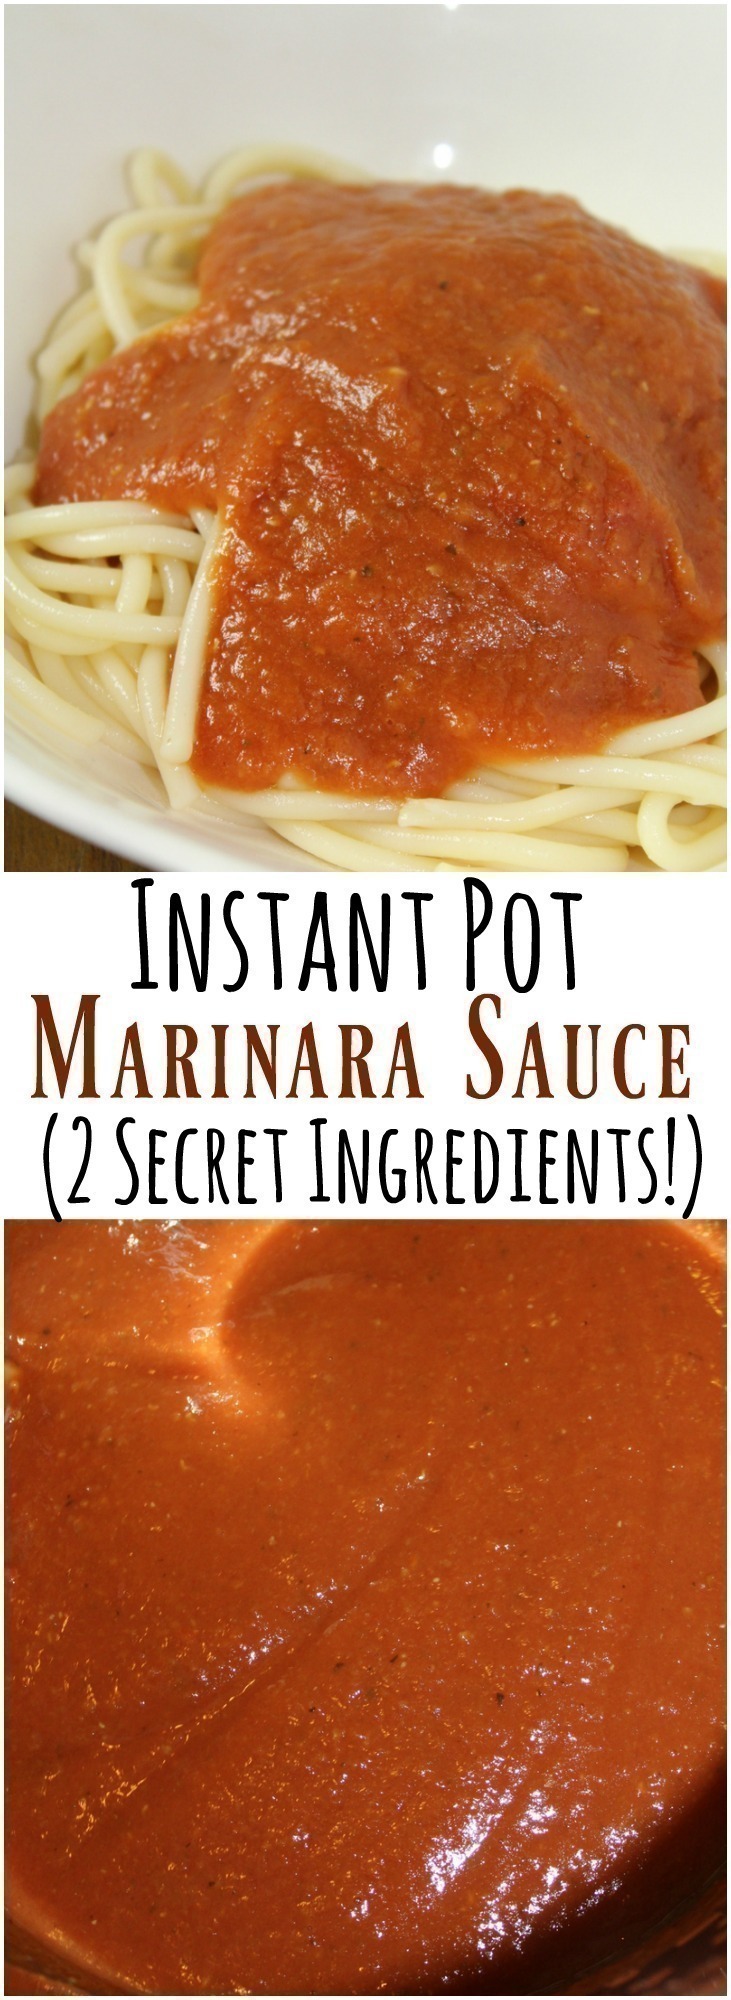 This marinara sauce combines basic tomatoes with 2 secret ingredients to make just over 8 cups ~ all in under 30 minutes in your Instant Pot!